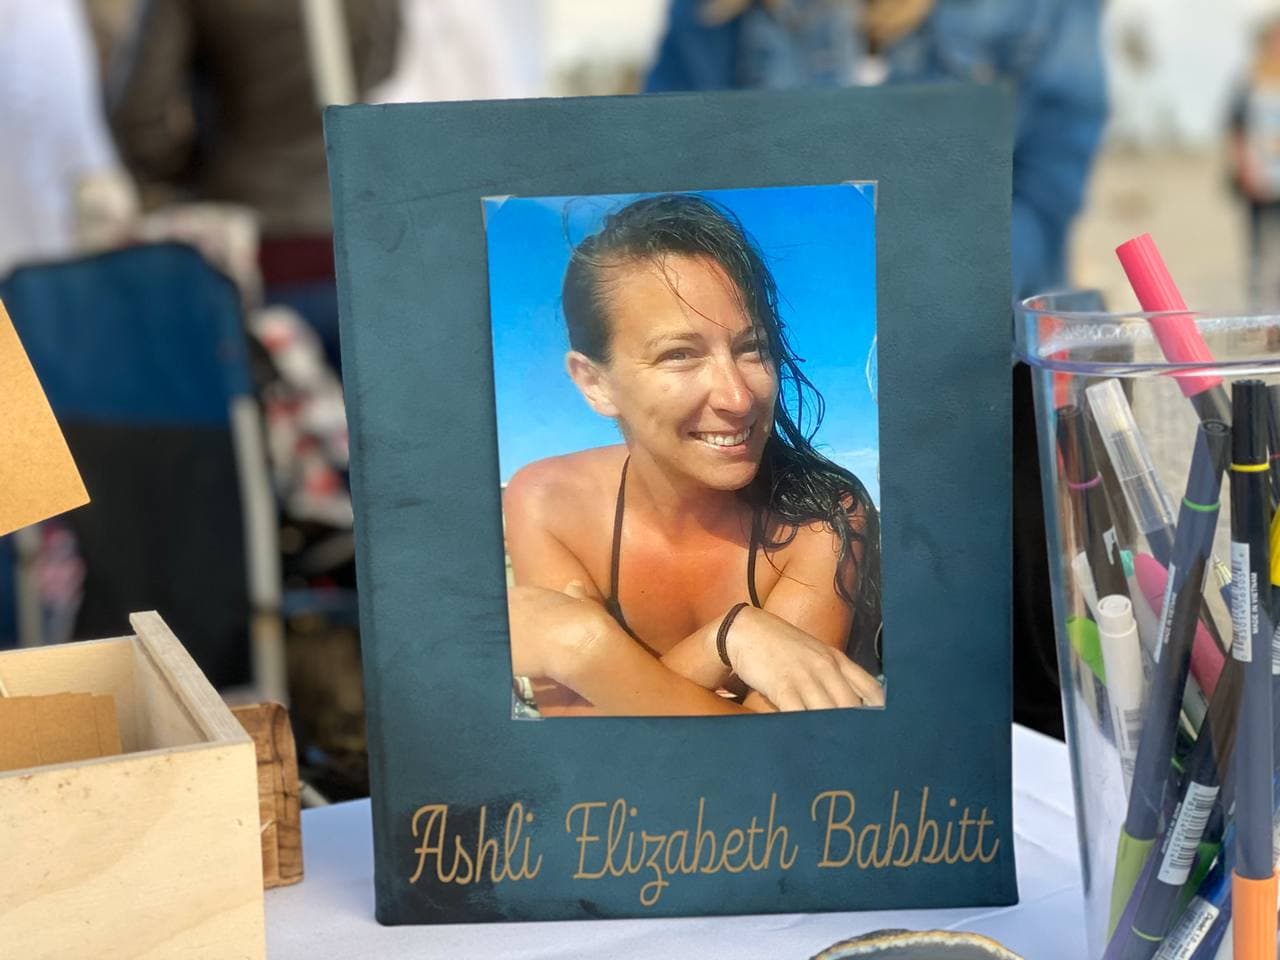 EXCLUSIVE: Ashli Babbitt’s Memorial Held in Southern
California – Family and Friends Honor a Loving and Passionate
American Patriot 1